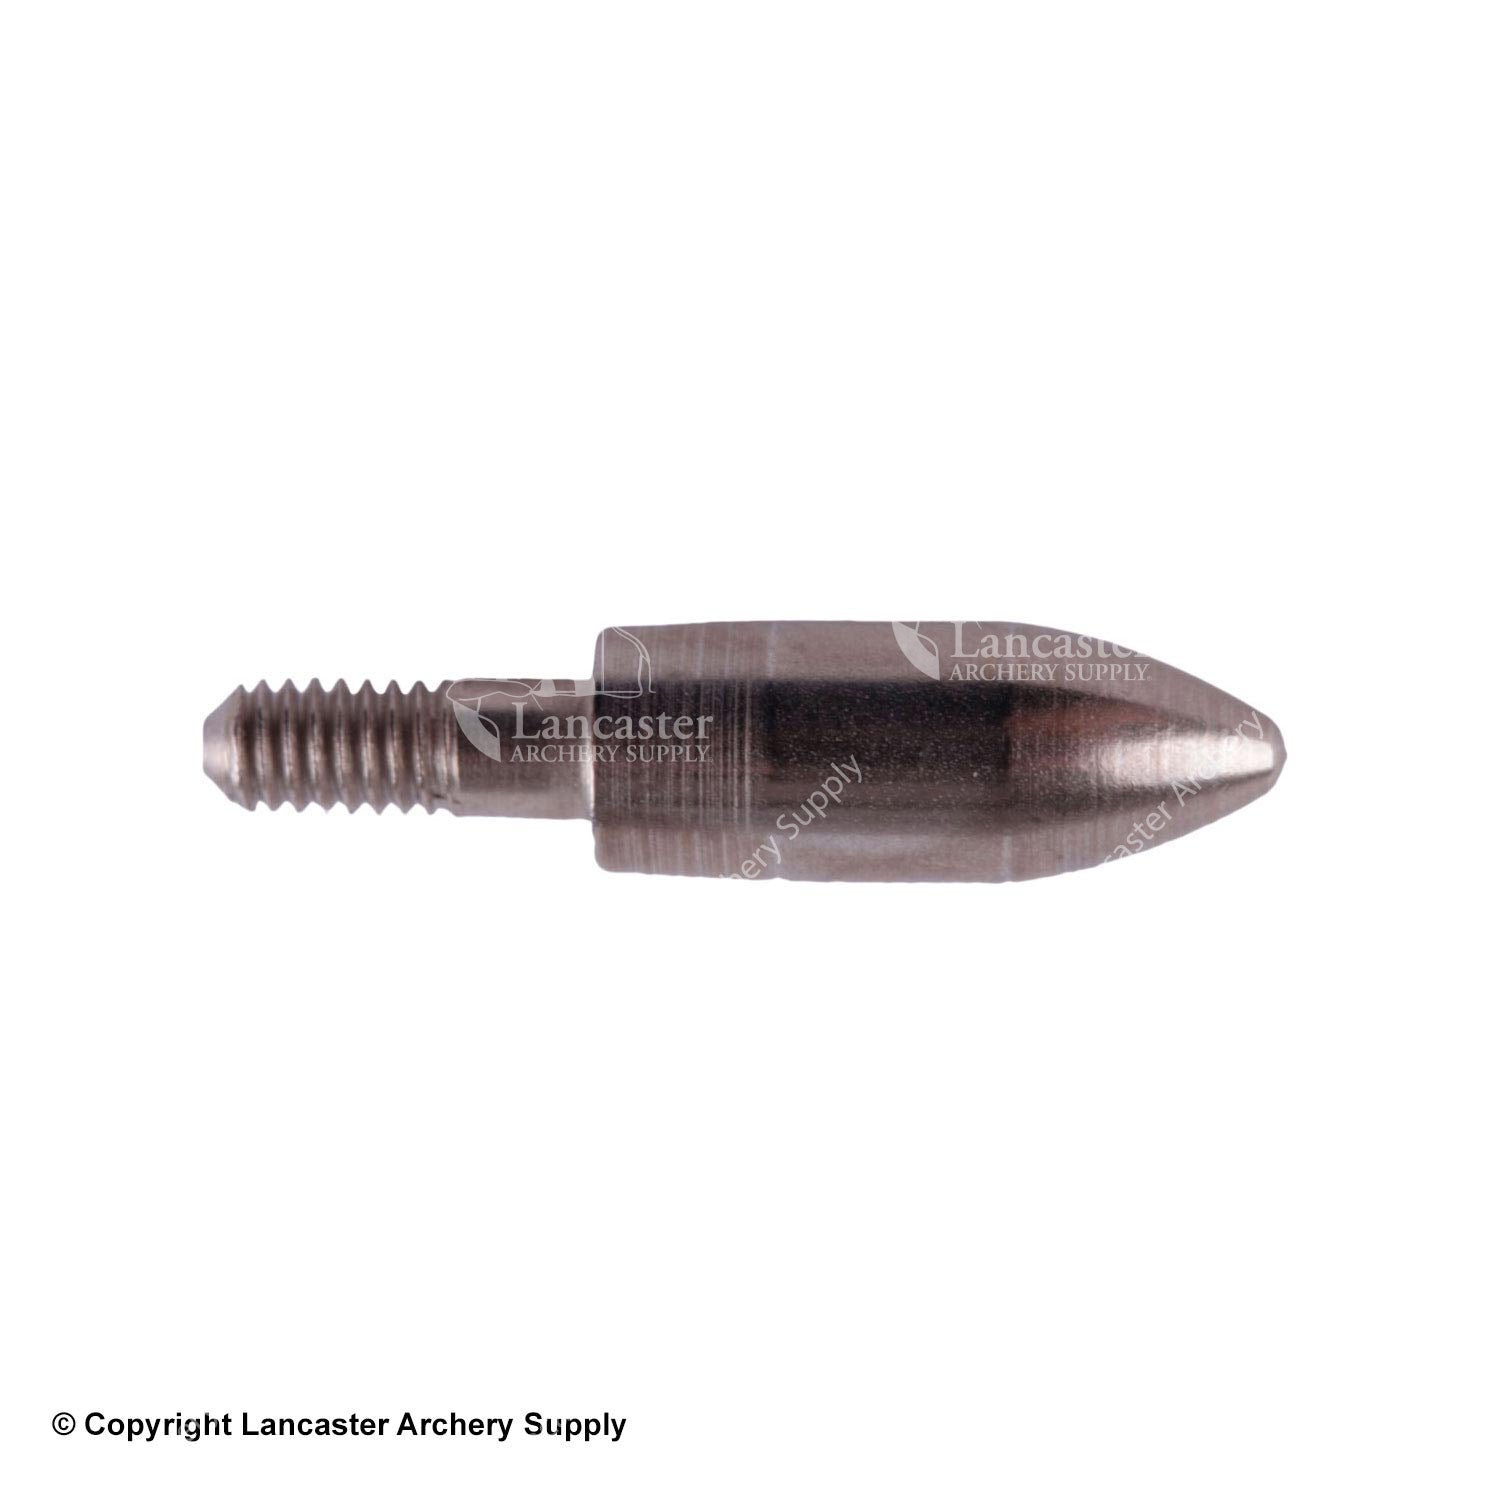 Easton A/C/E Screw-in Point